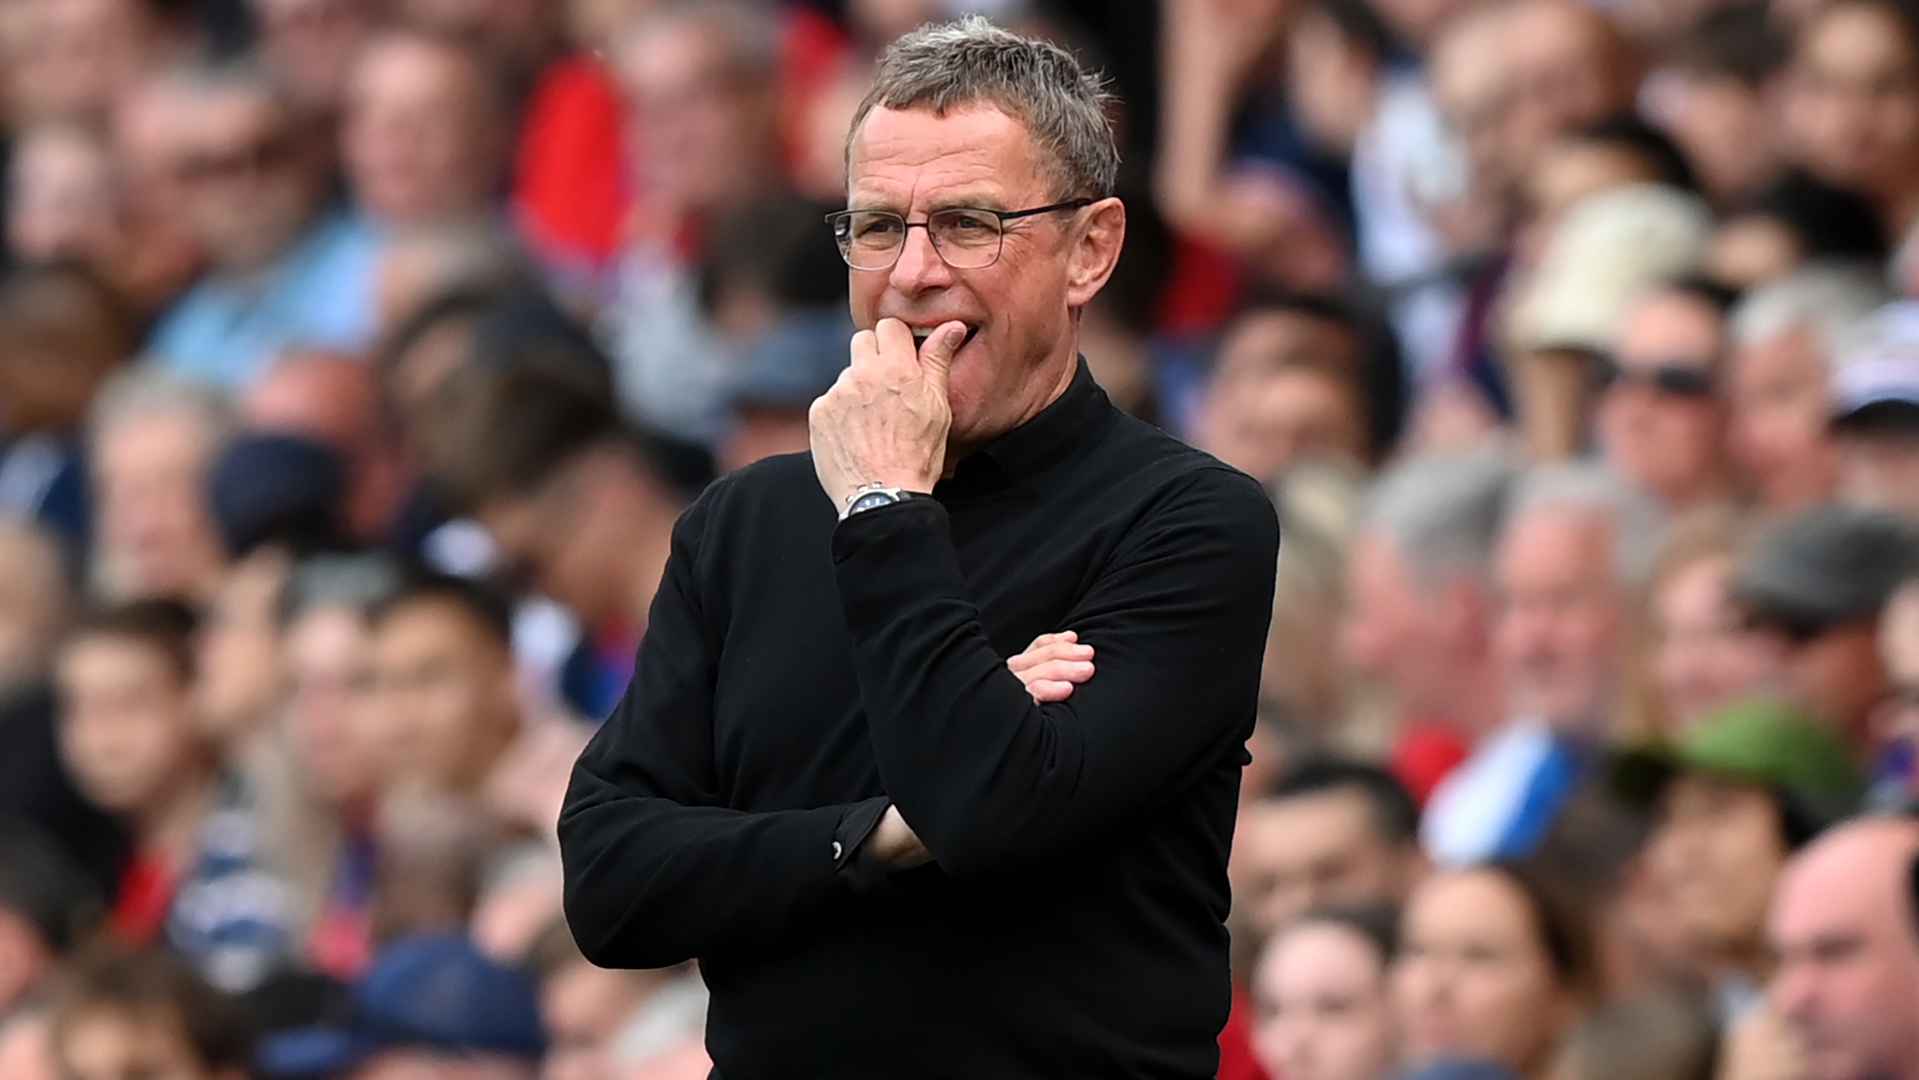 Ralf Rangnick reacts to defeat to Crystal Palace | Manchester United